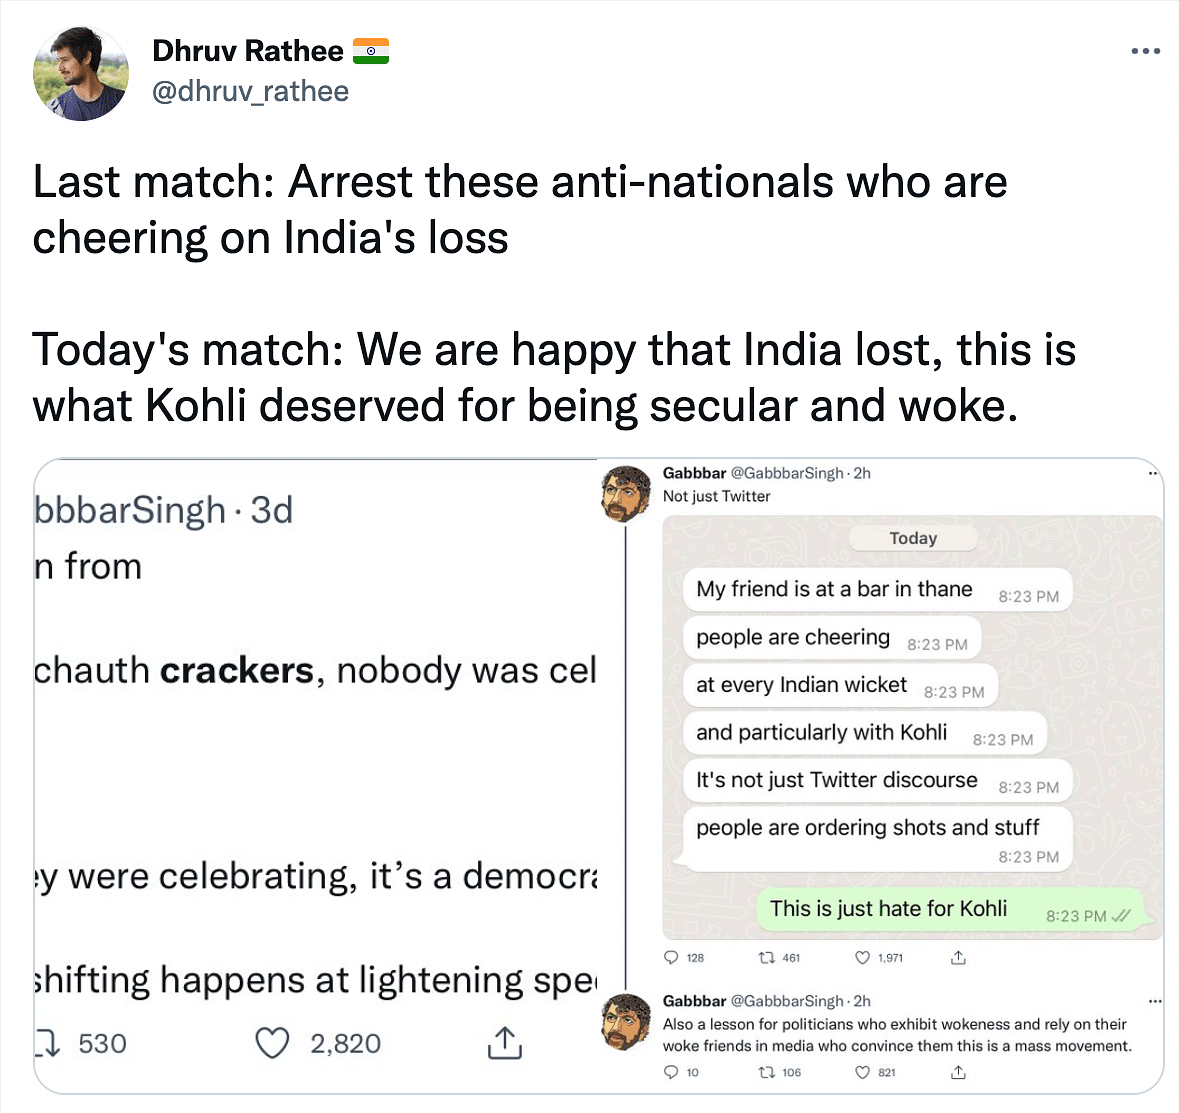 The Indian Cricket Team has been relentlessly criticised on social media after losing to New Zealand yesterday.